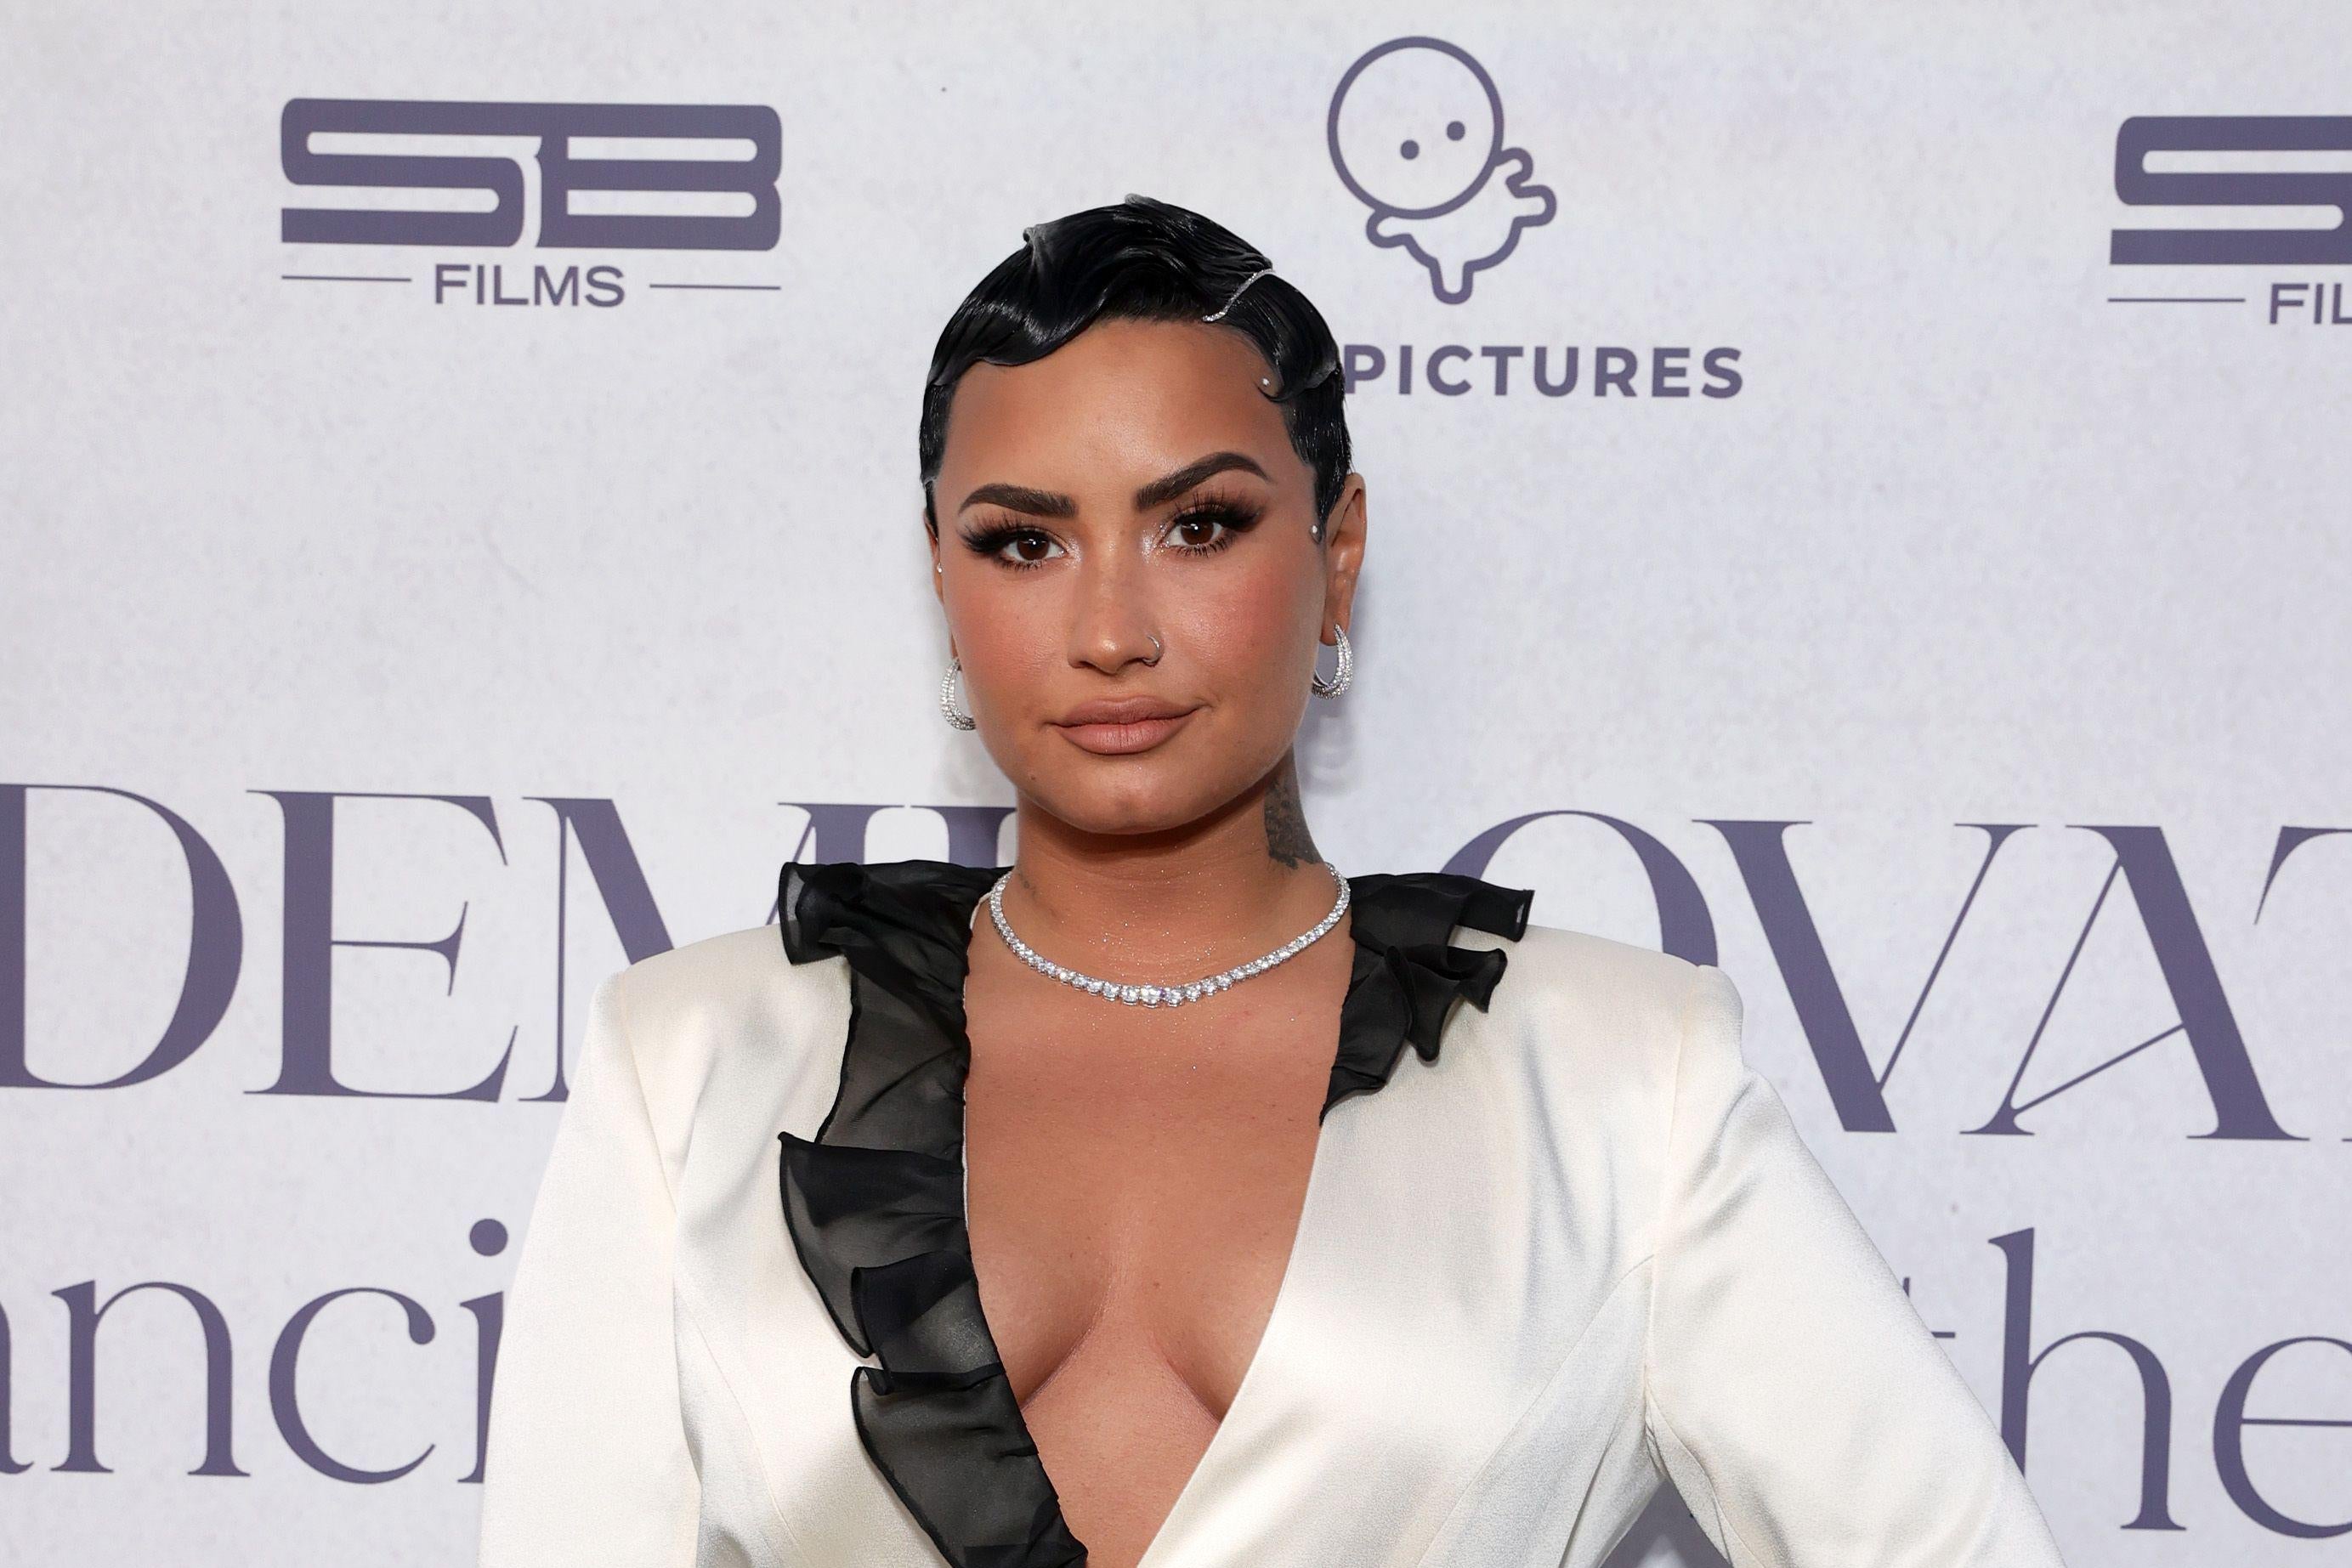 Lovato on the red carpet sporting a black wavy pixie cut and a white dress with a plunging neckline, black cuffs, and a black ruffled collar.